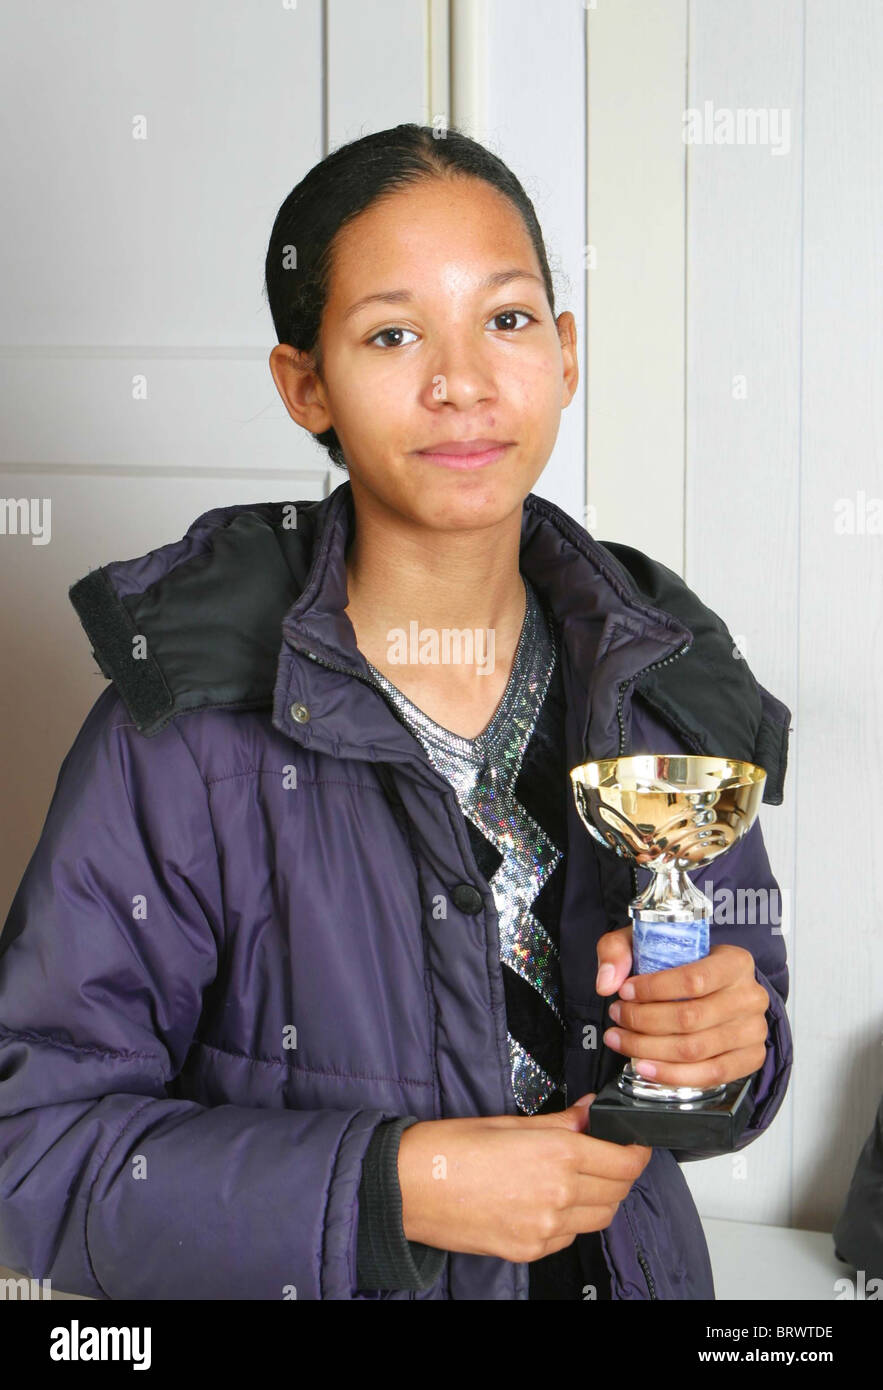 Casual Latin American teenage girl with serious expression holding goblet price in hands Stock Photo